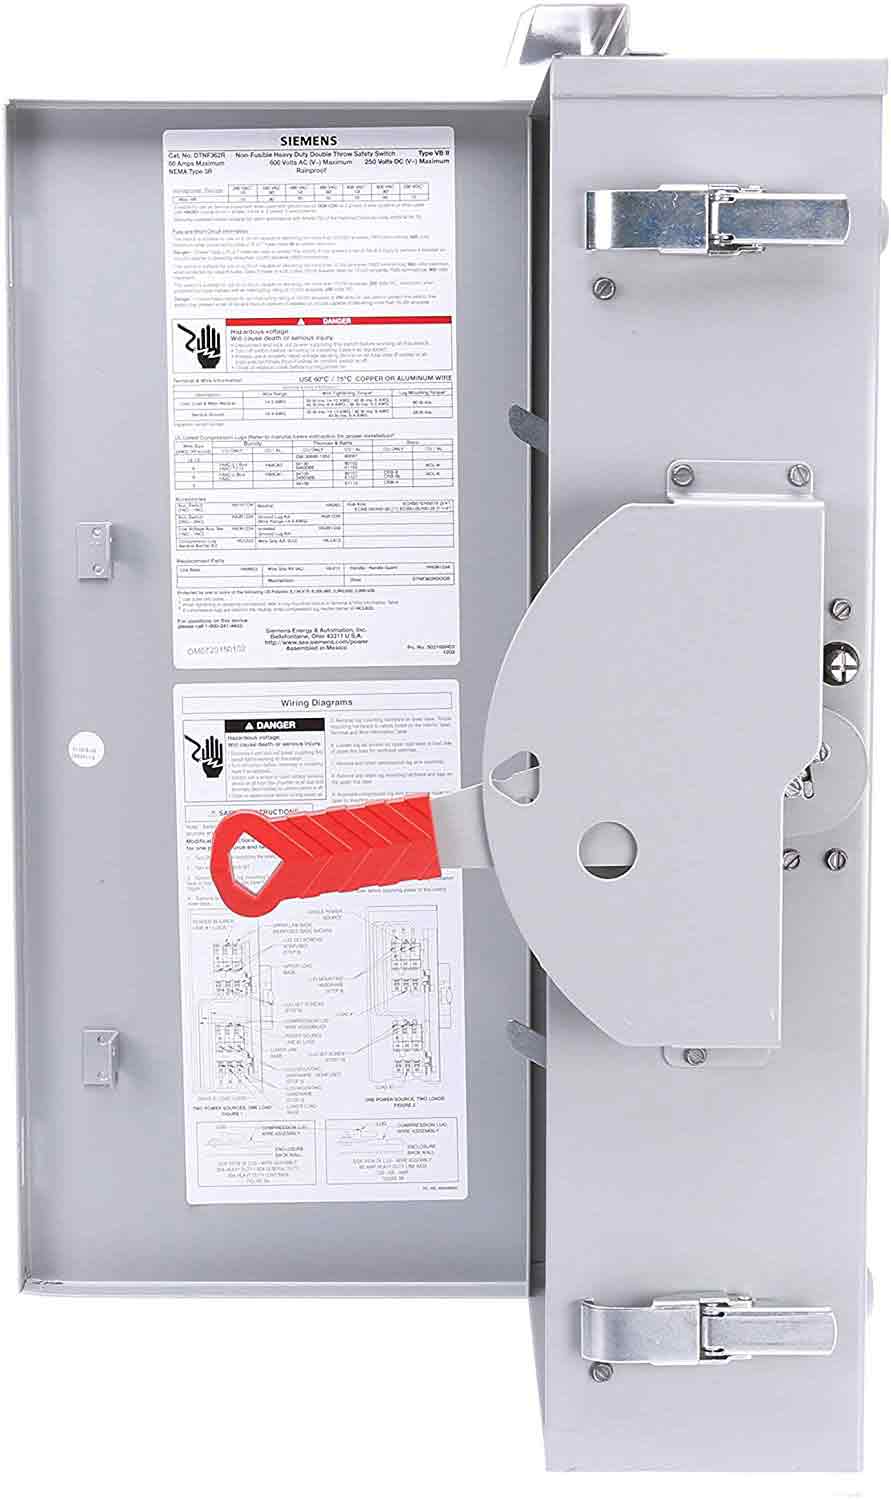 DTNF321 - Siemens - 30 Amp Disconnect Safety Switches